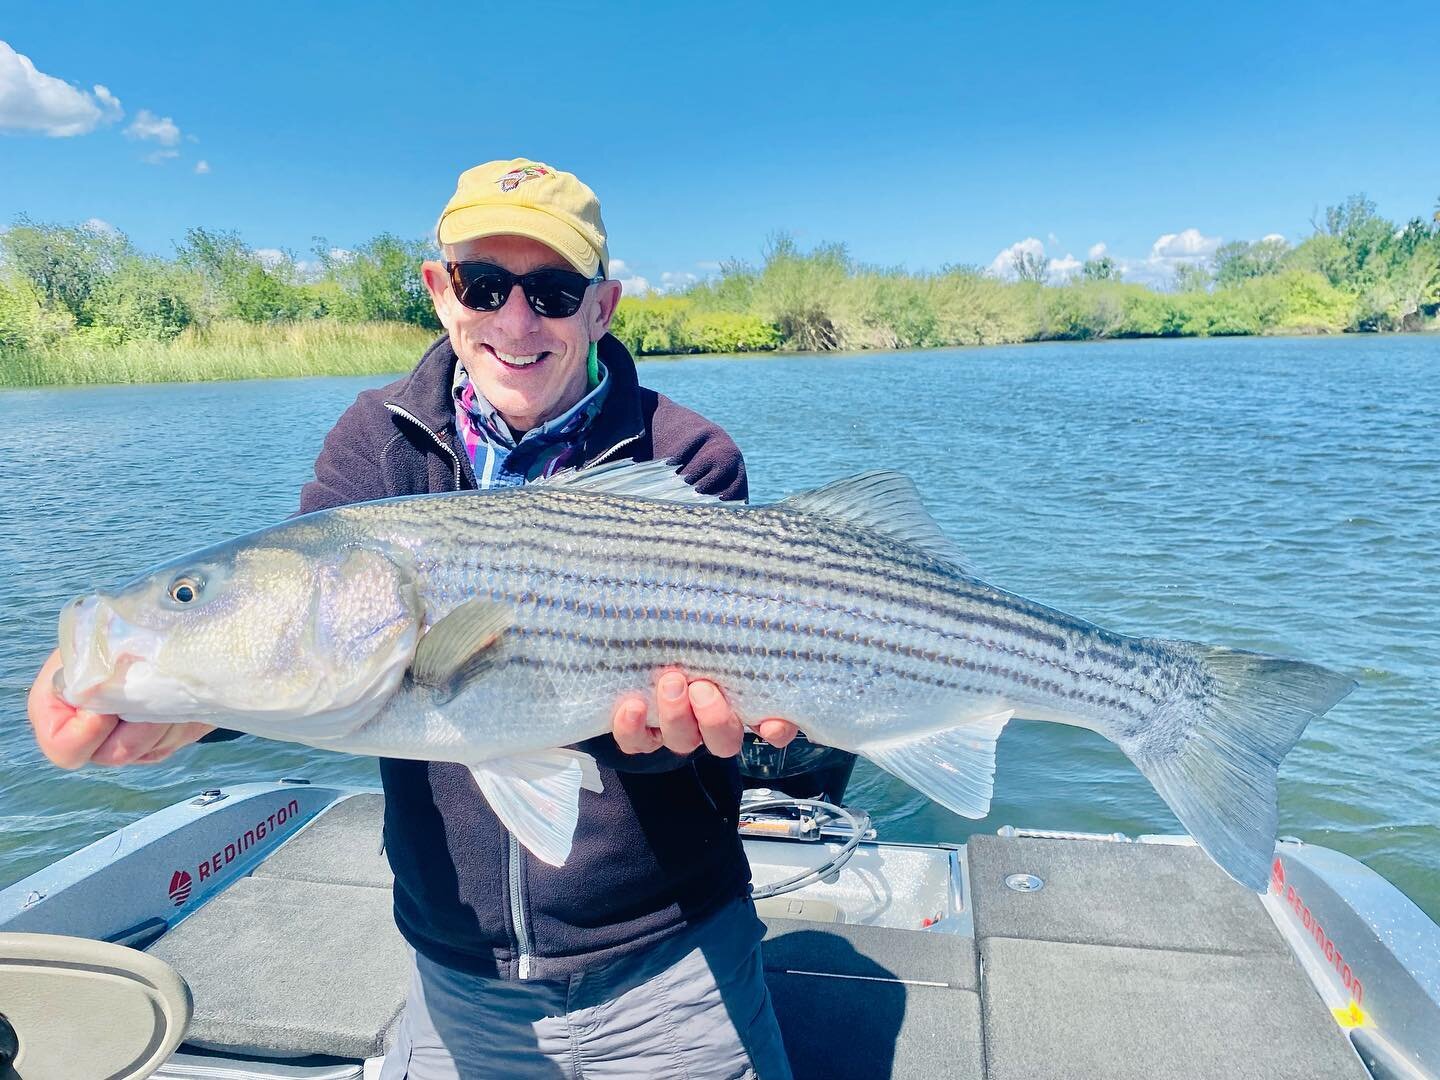 The wind has been a challenge this Spring but guests have risen to that challenge! @redingtongear @rioproducts @sageflyfish @costasunglasses @simmsfishing @calbassunion @grundens @yeti @traegergrills